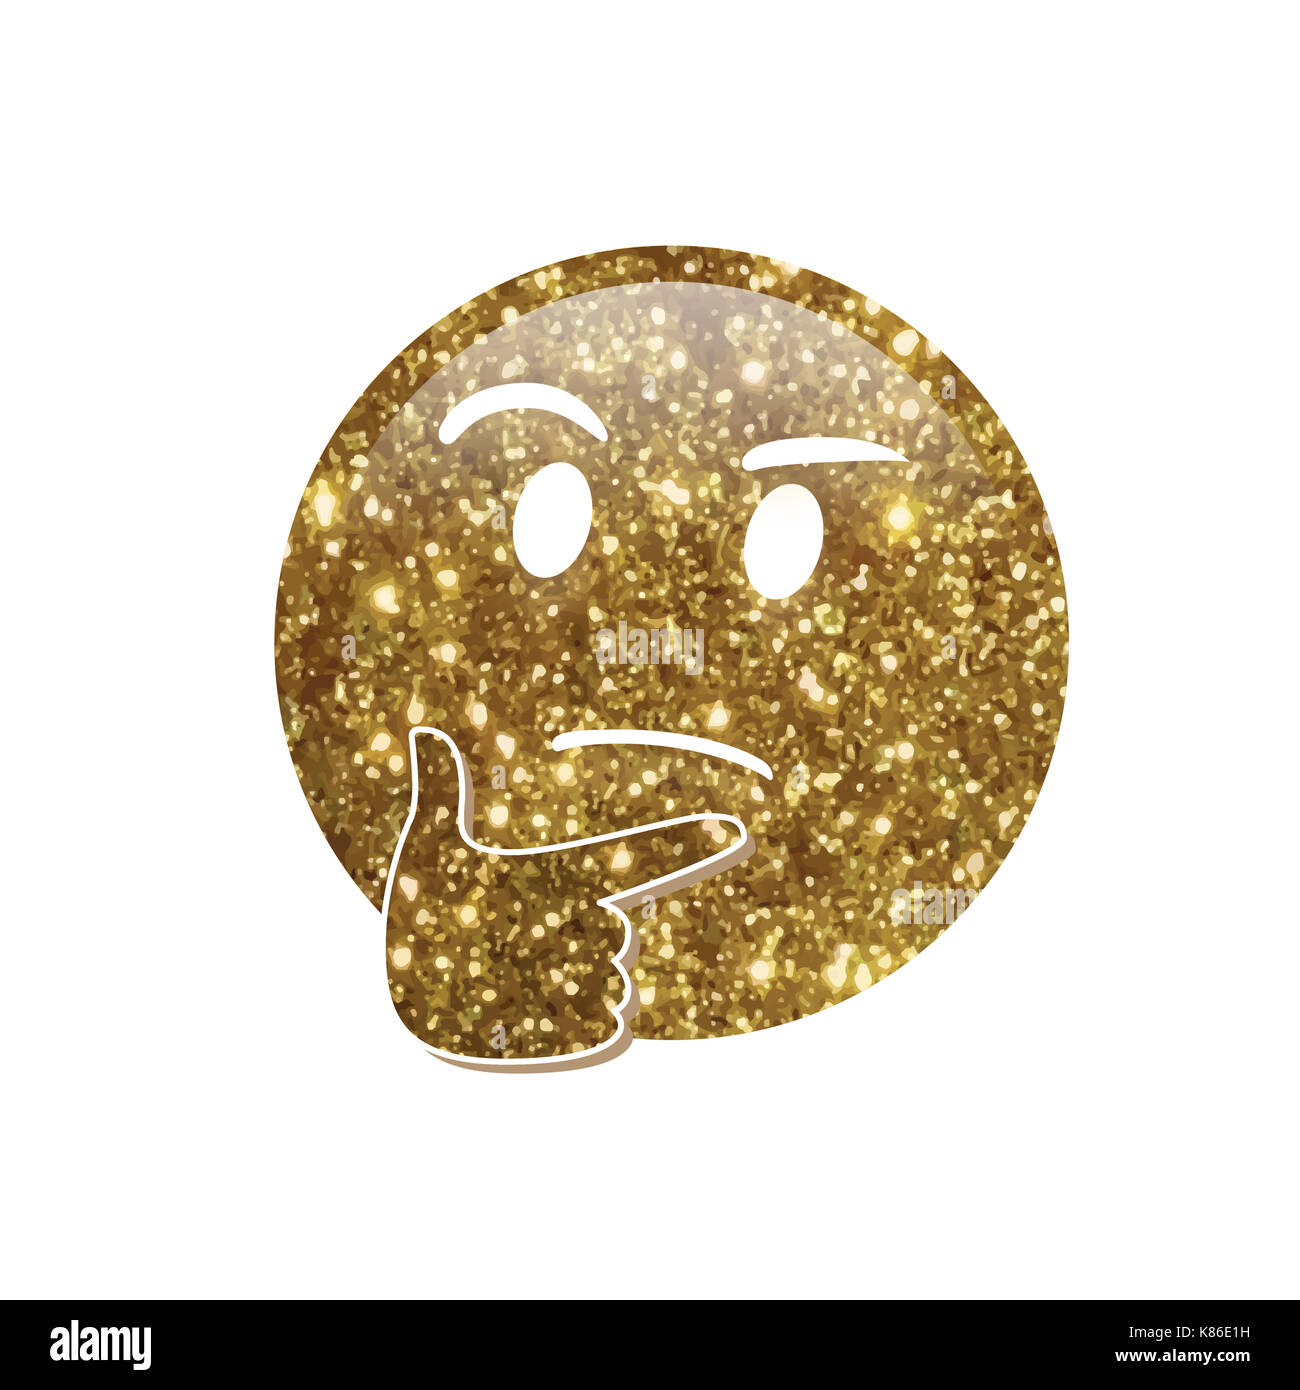 The emoji golden glitter pondering, thinking or deep in thought face with index finger resting on its chin Stock Photo